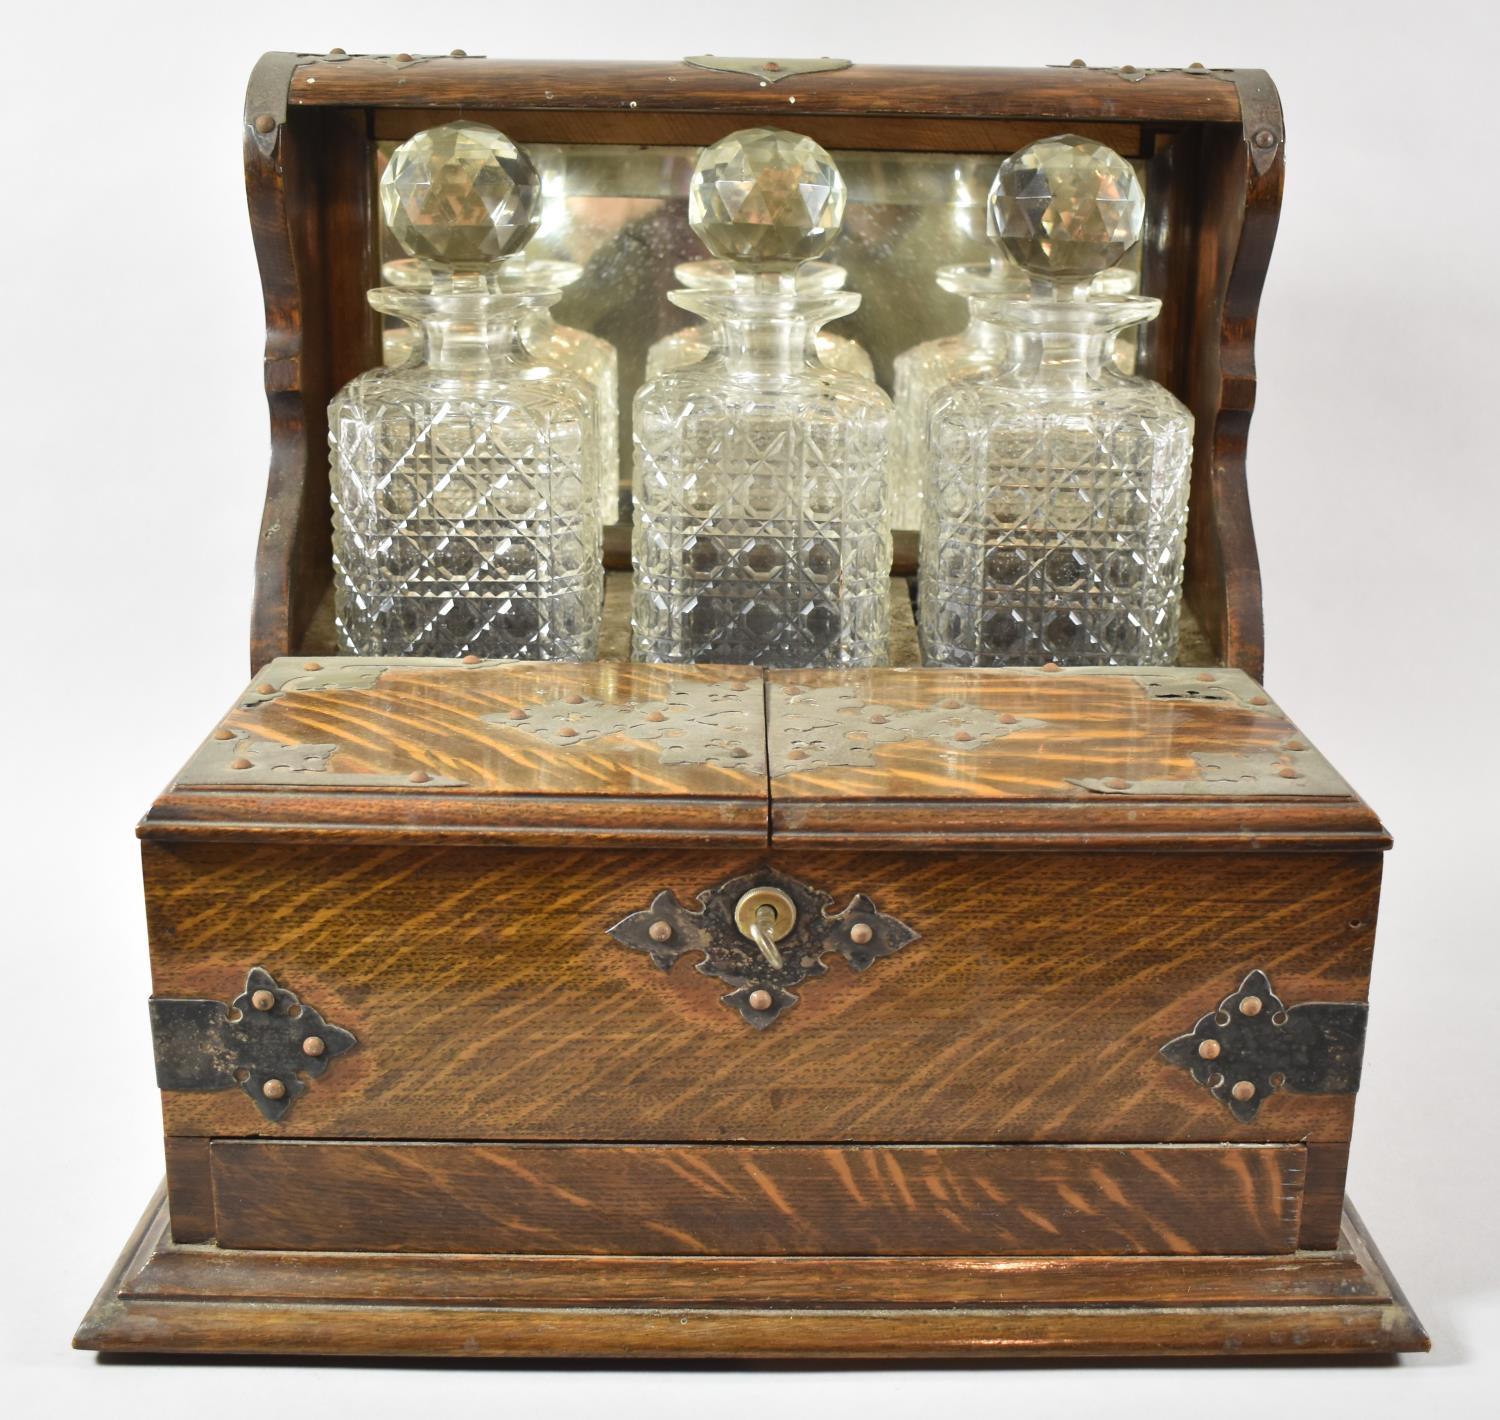 A Late 19th Century Silver Plate Mounted Three Bottle Games Tantalus with Hinged Lid to Games - Image 2 of 4